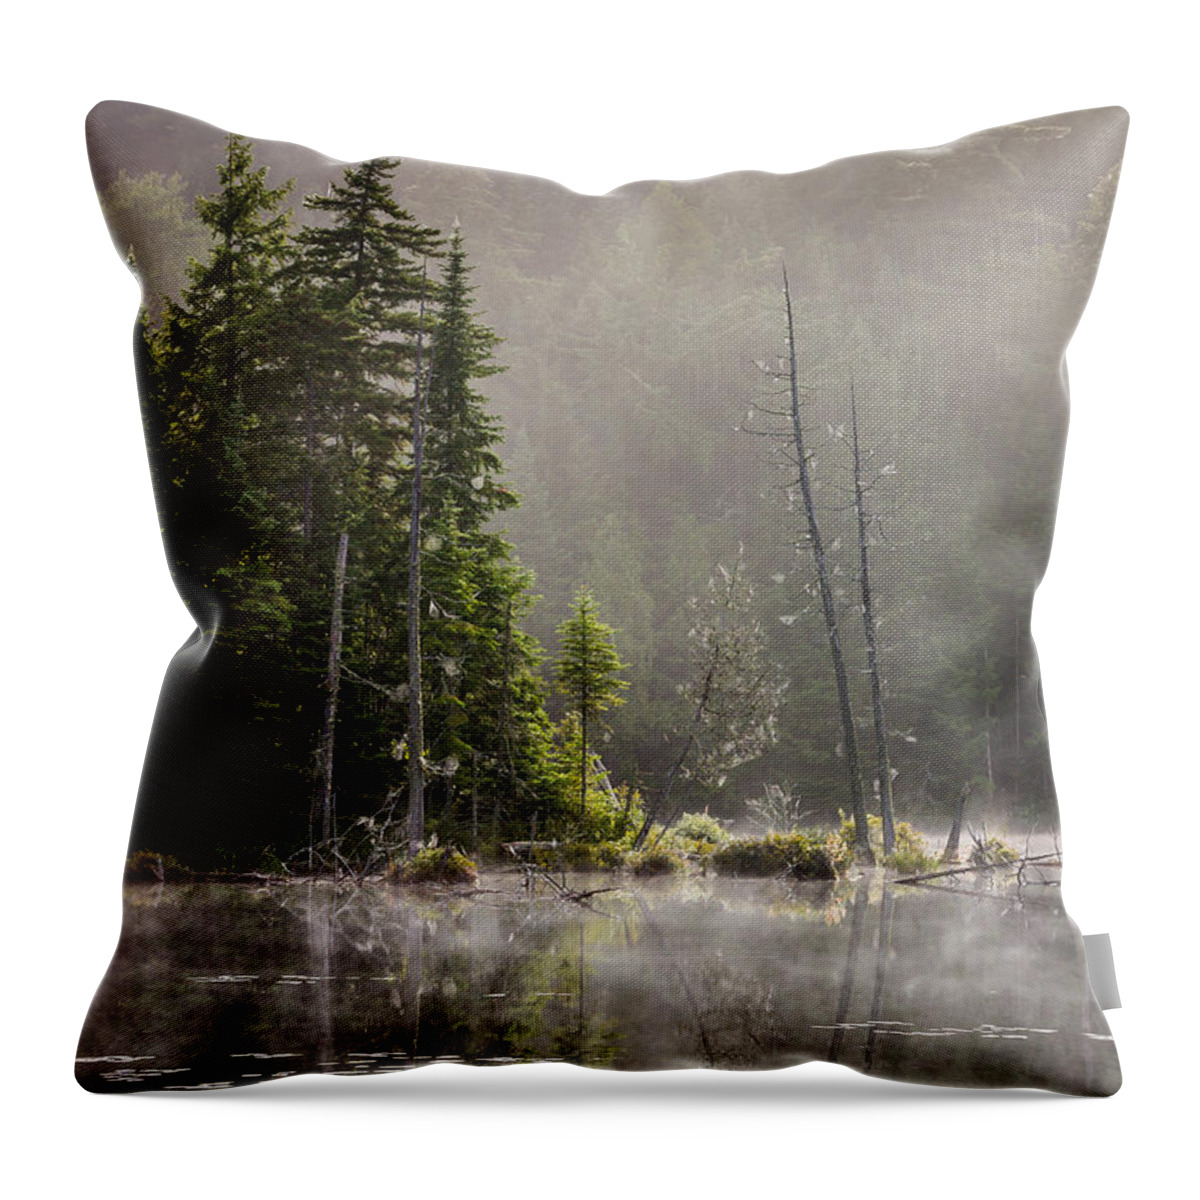 Art Throw Pillow featuring the photograph Adirondack Dream by Gary Migues